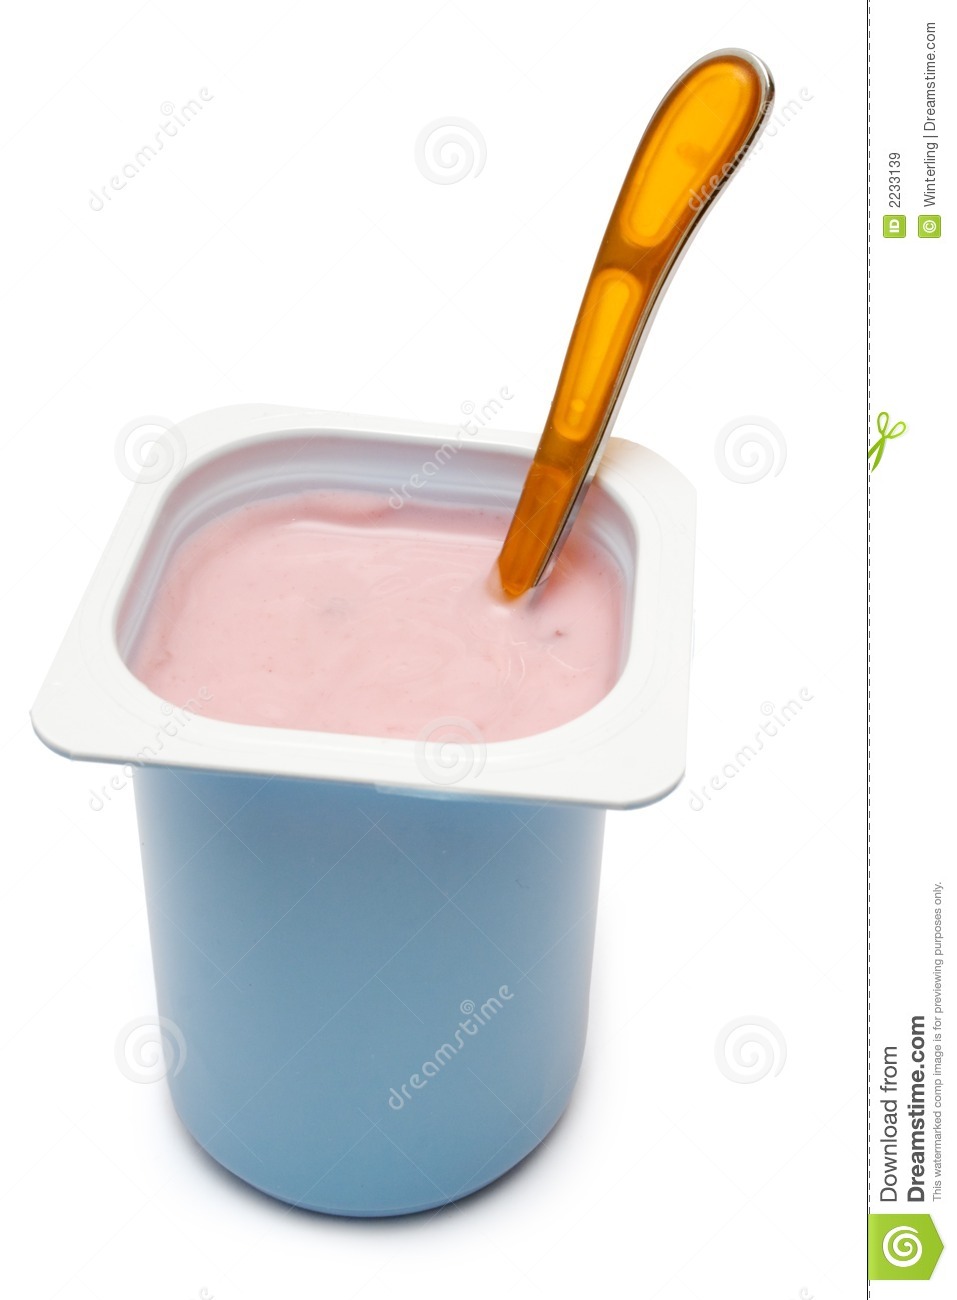 Plastic Yogurt Pot With A Spoon Isolated On A White Background